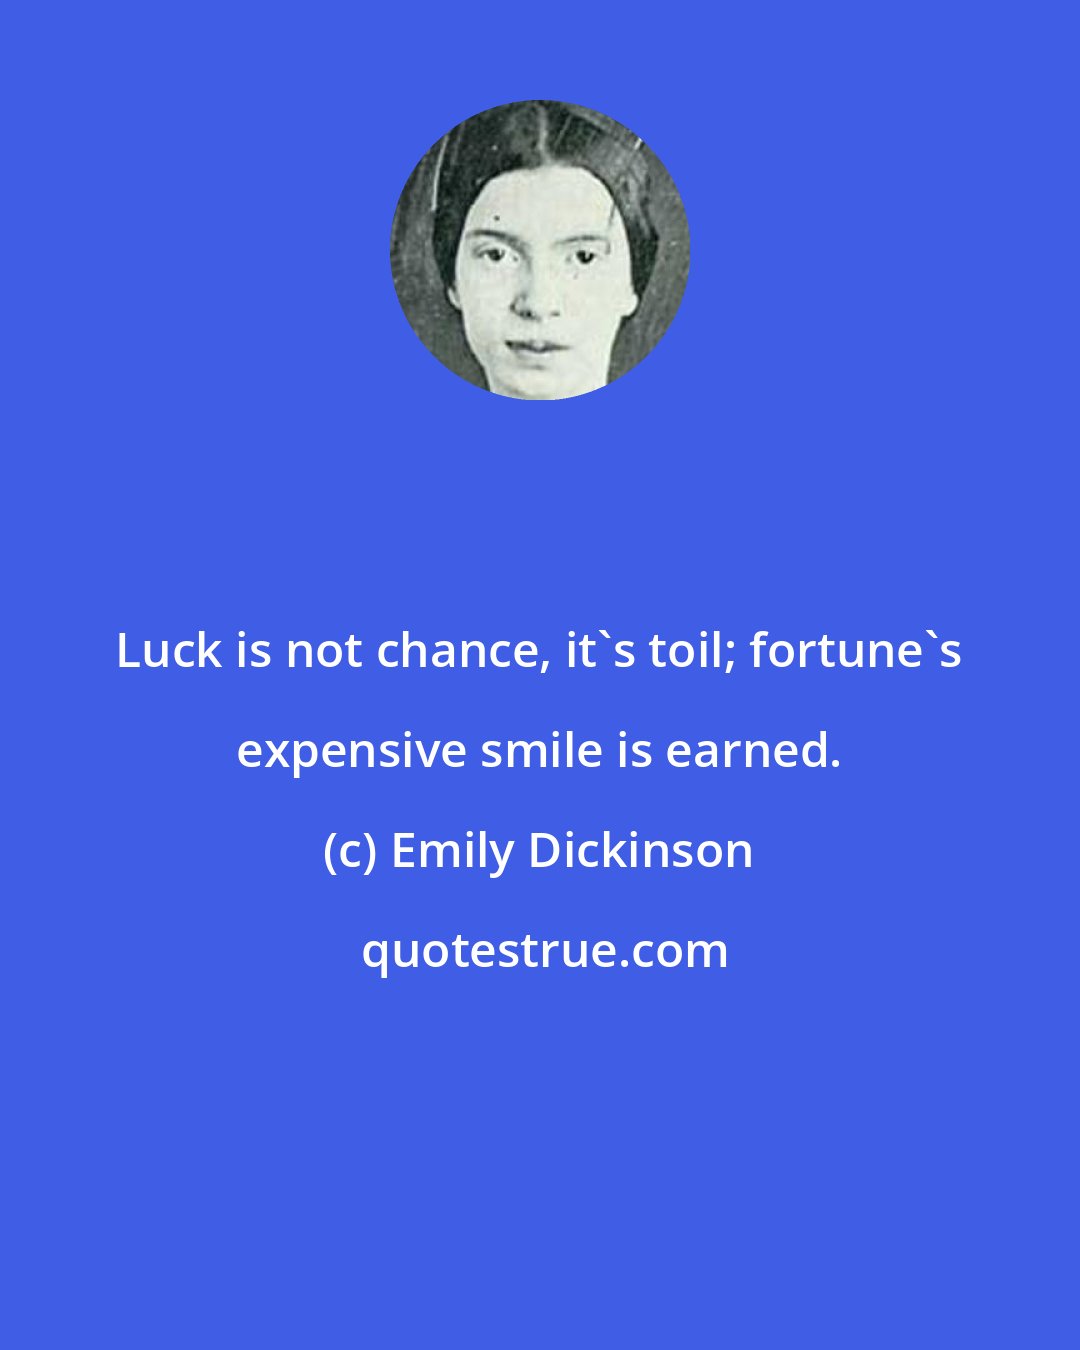 Emily Dickinson: Luck is not chance, it's toil; fortune's expensive smile is earned.